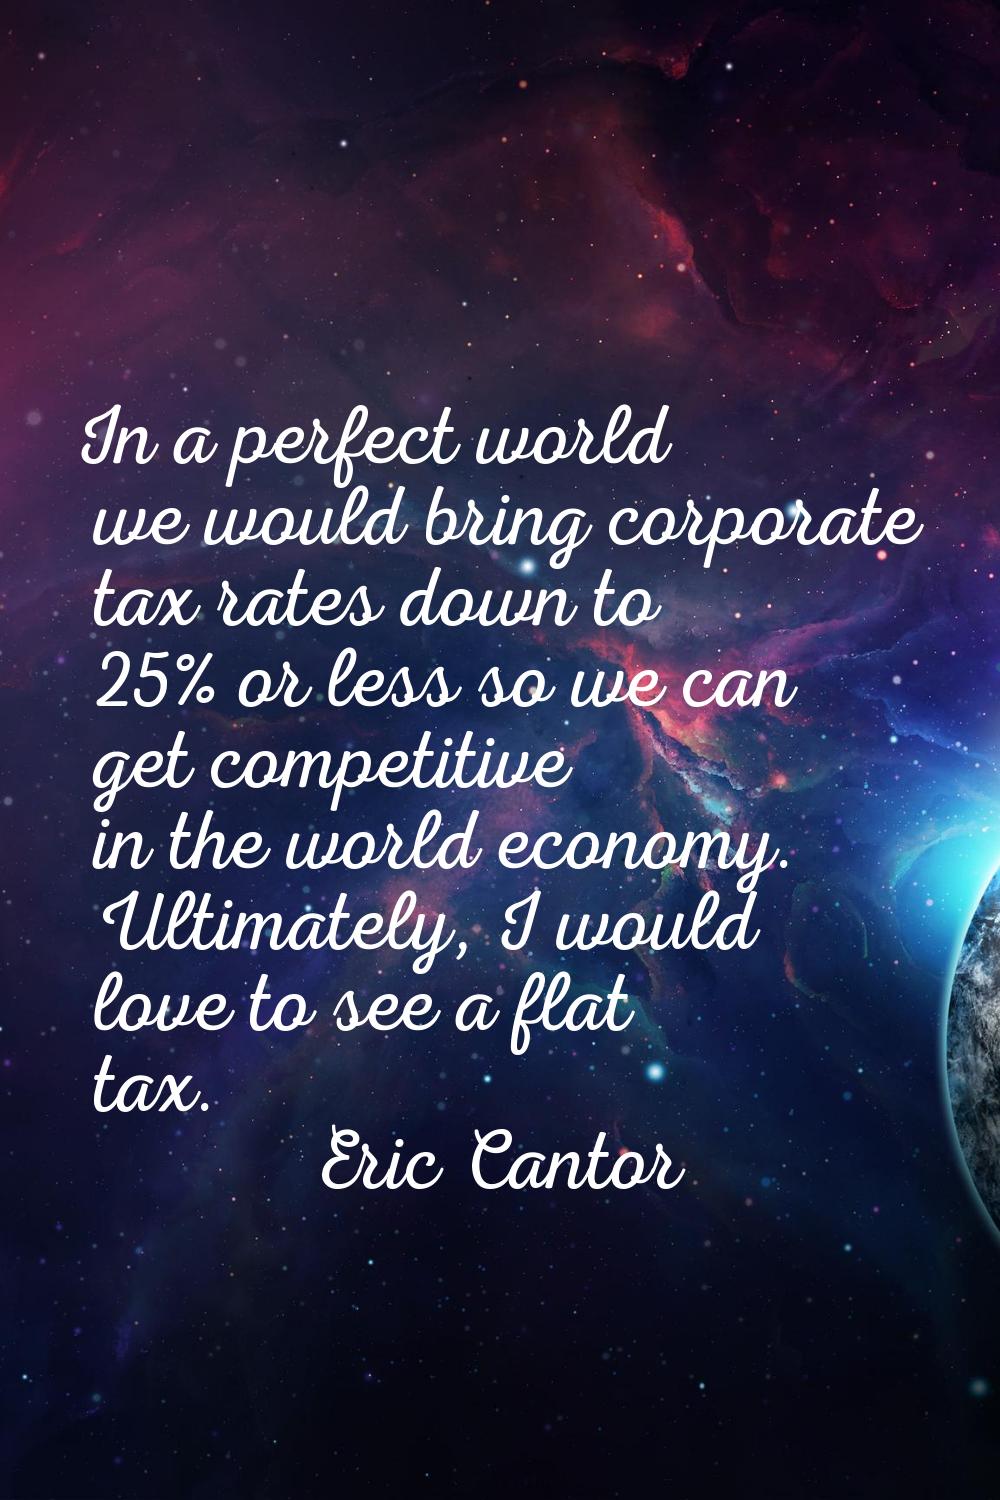 In a perfect world we would bring corporate tax rates down to 25% or less so we can get competitive